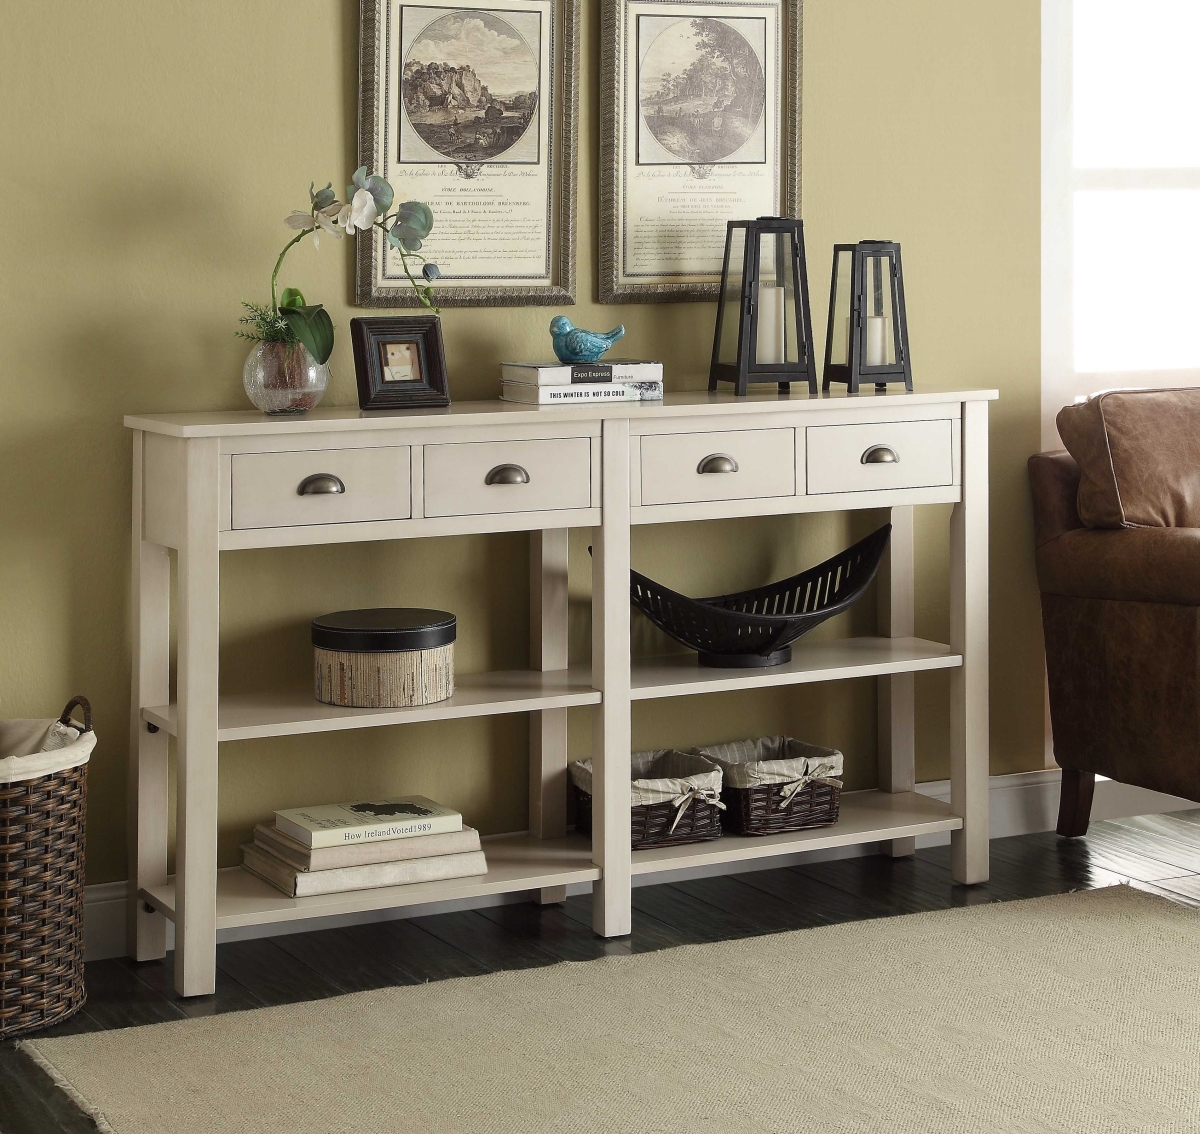 Home Roots Furniture 286112 35 X 60 X 12 In. Wood & Mdf Console Table - Cream